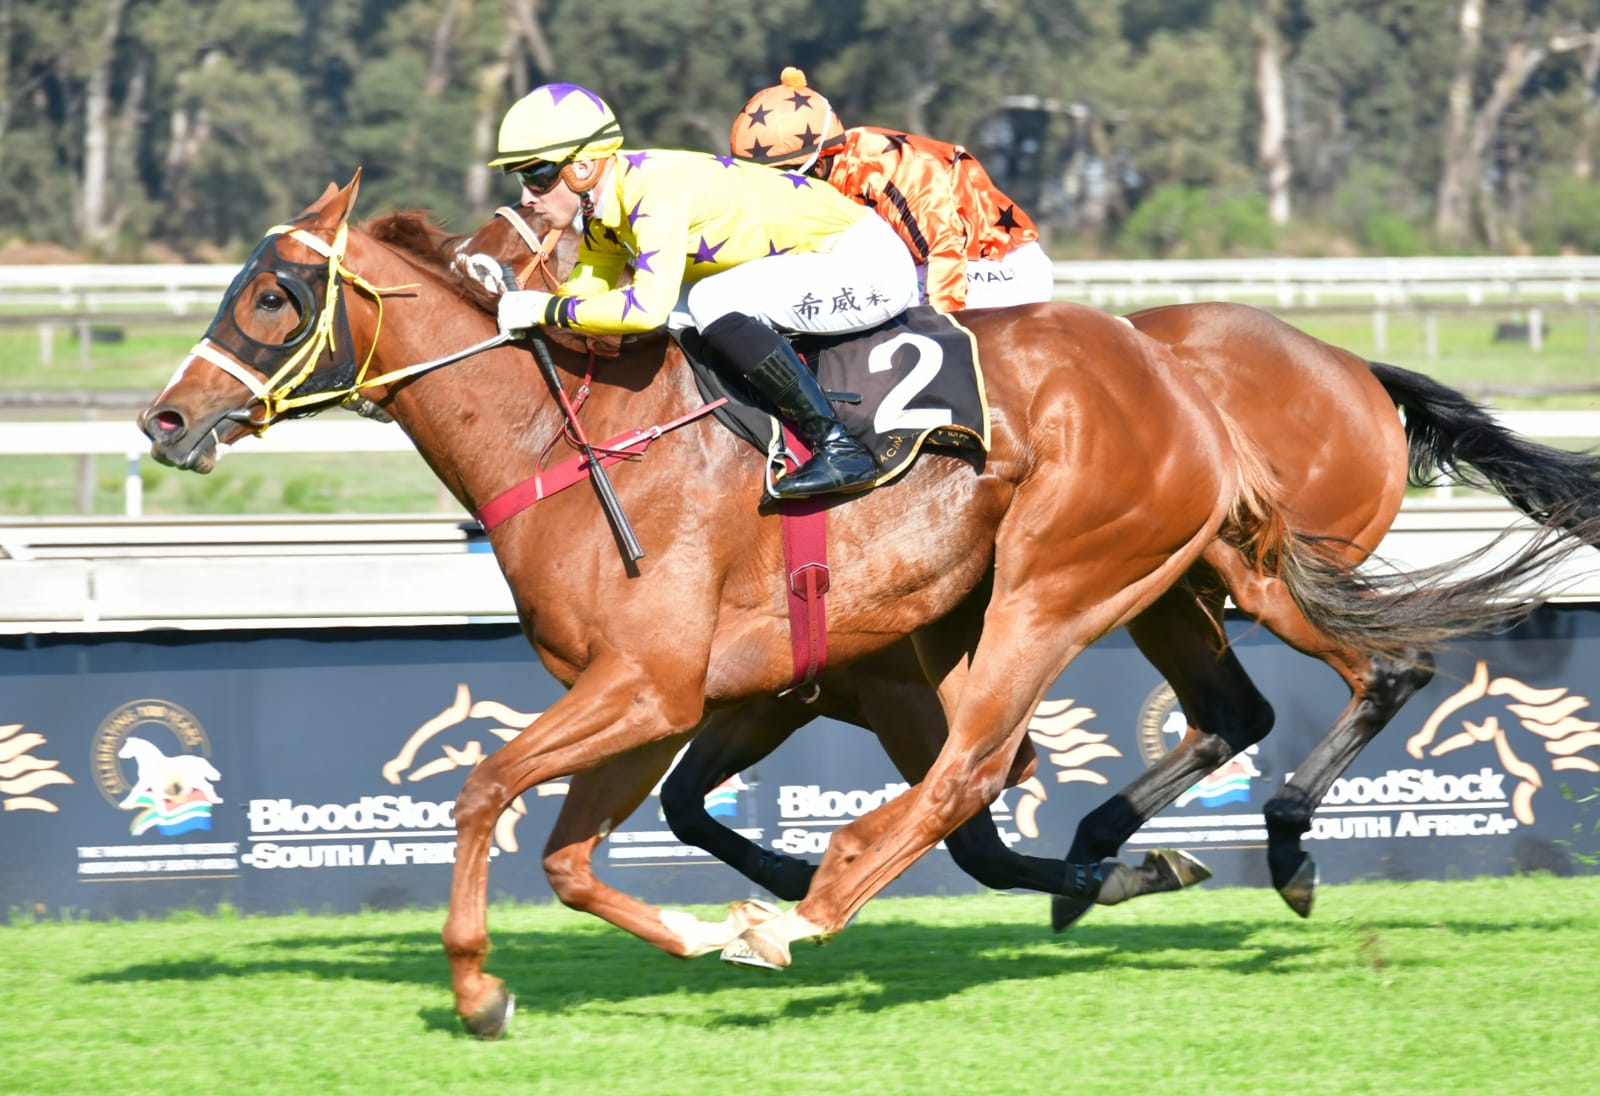 The horse Grappler winning at the Vaal